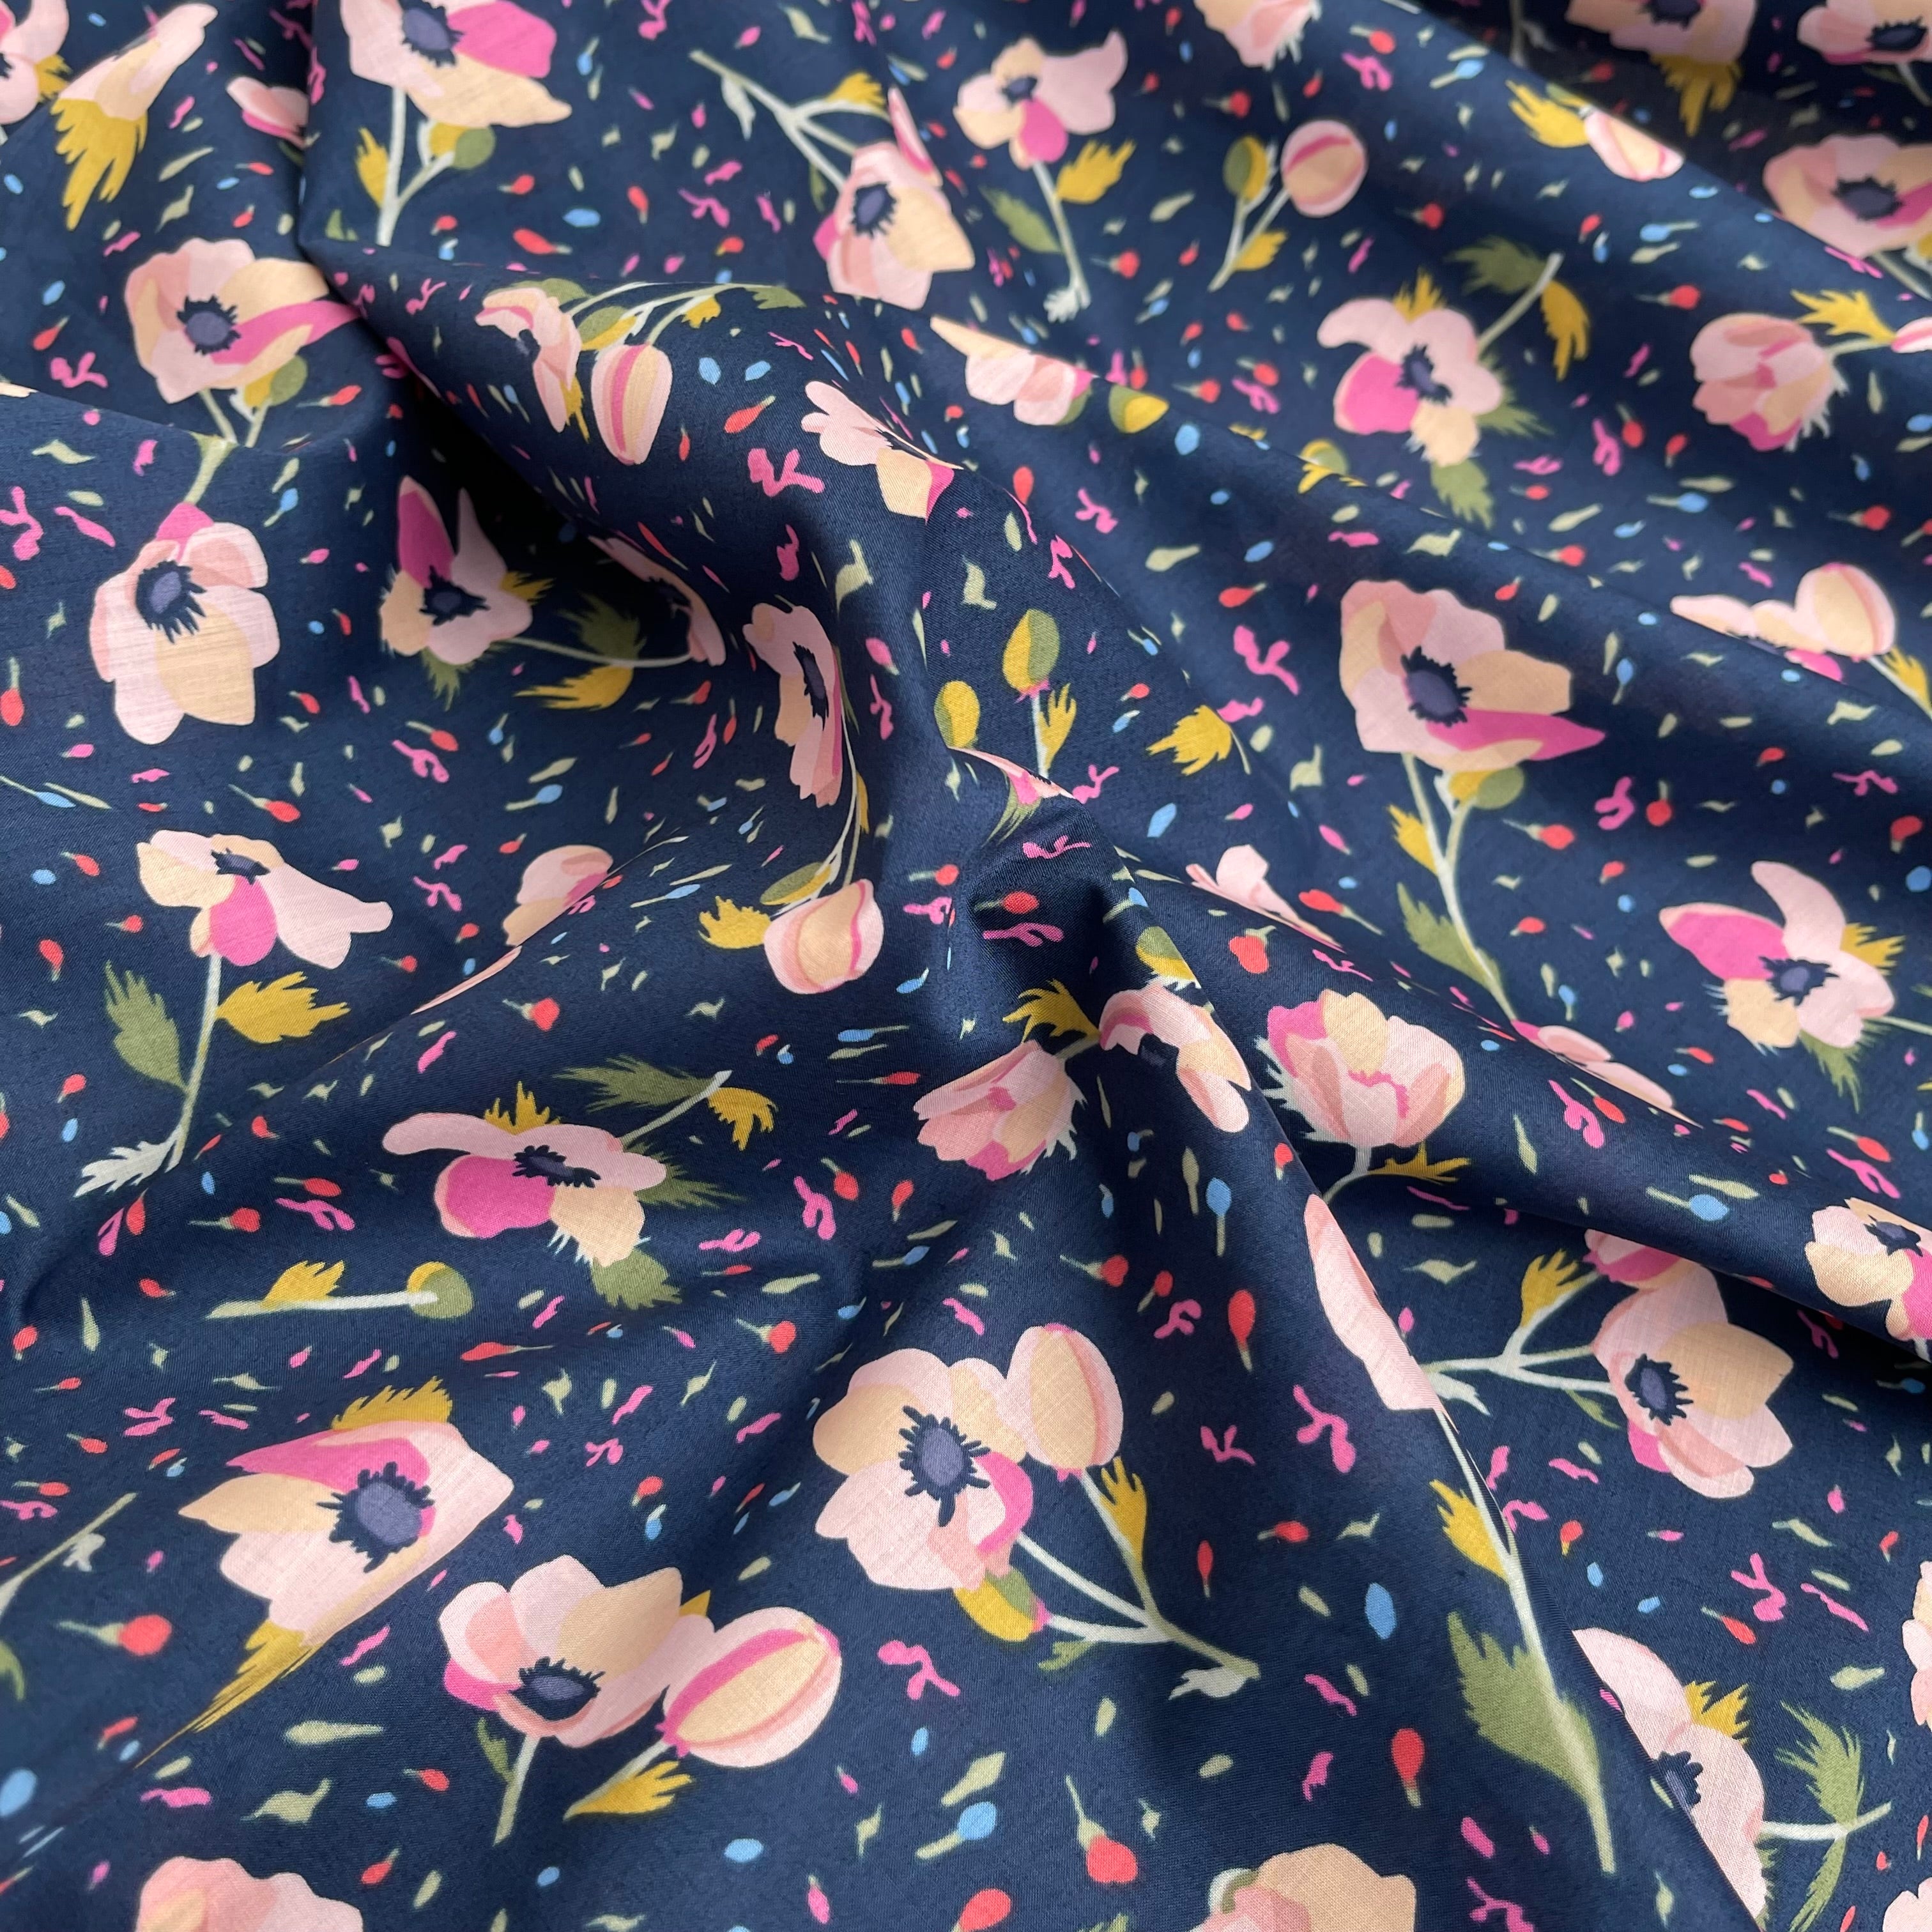 Rosa on Navy Cotton Lawn Fabric